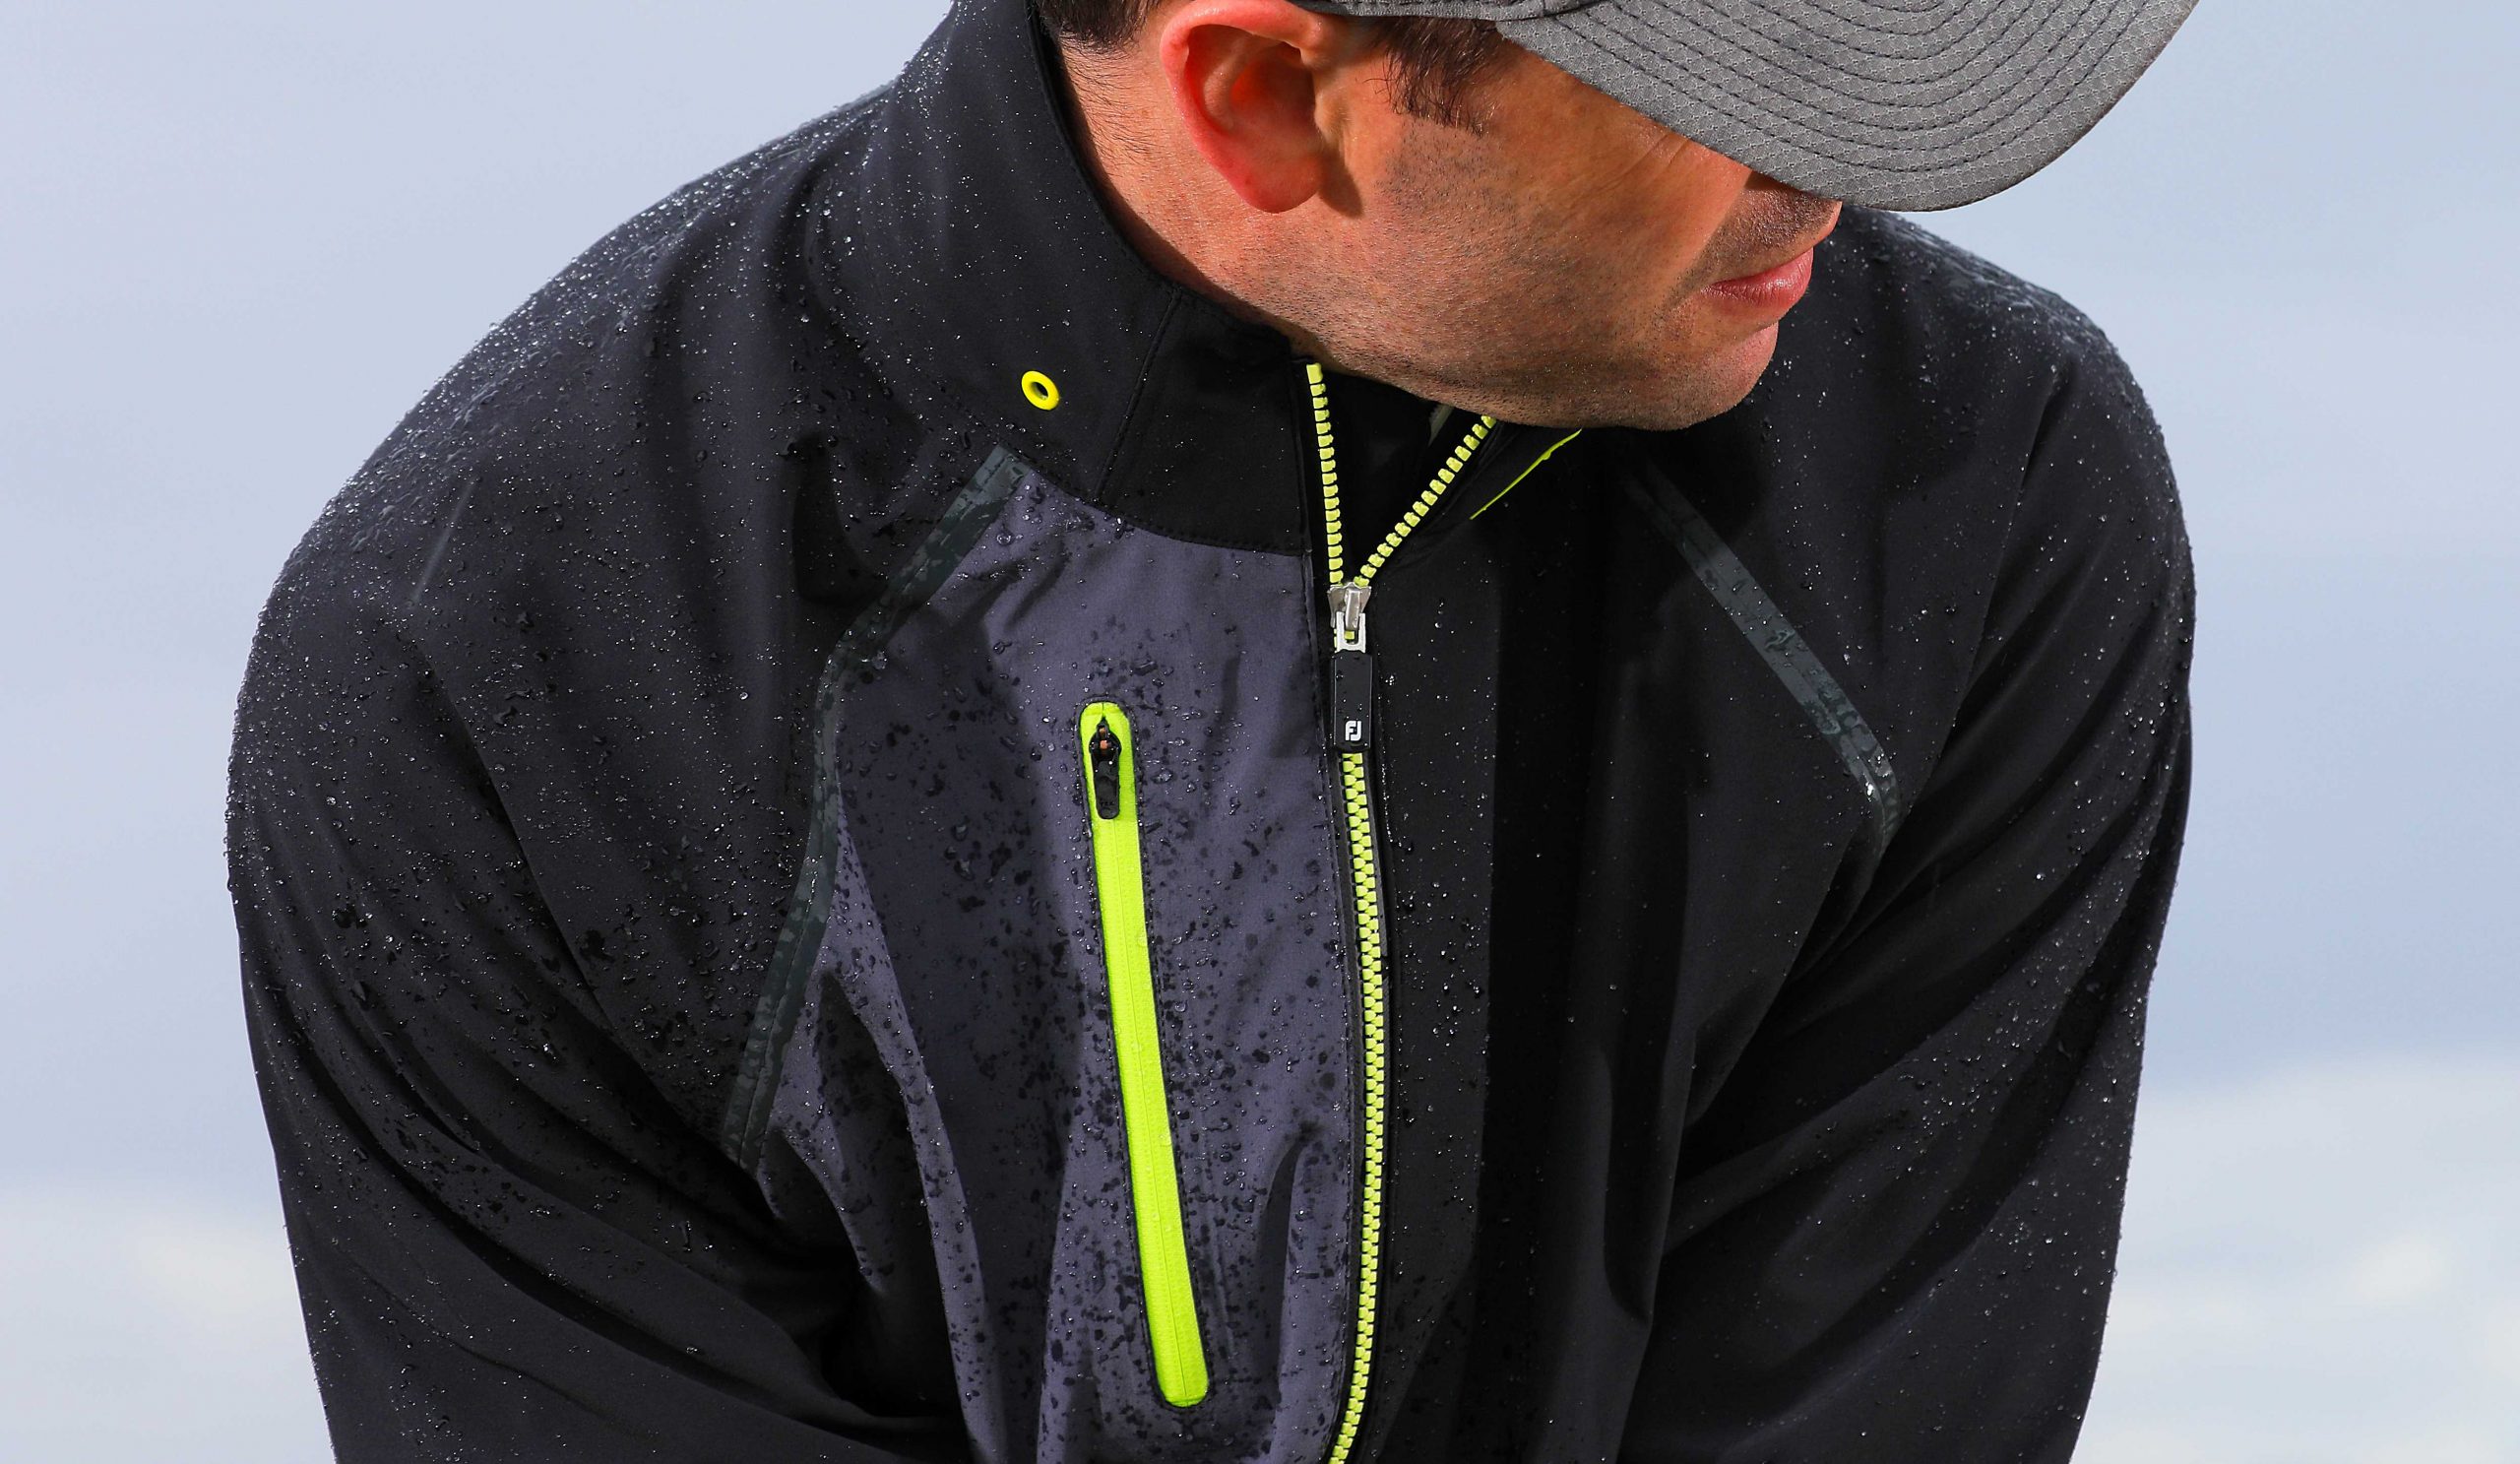 The-HydroTour-is-designed-to-equip-golfers-with-the-ultimate-storm-proof-jacket